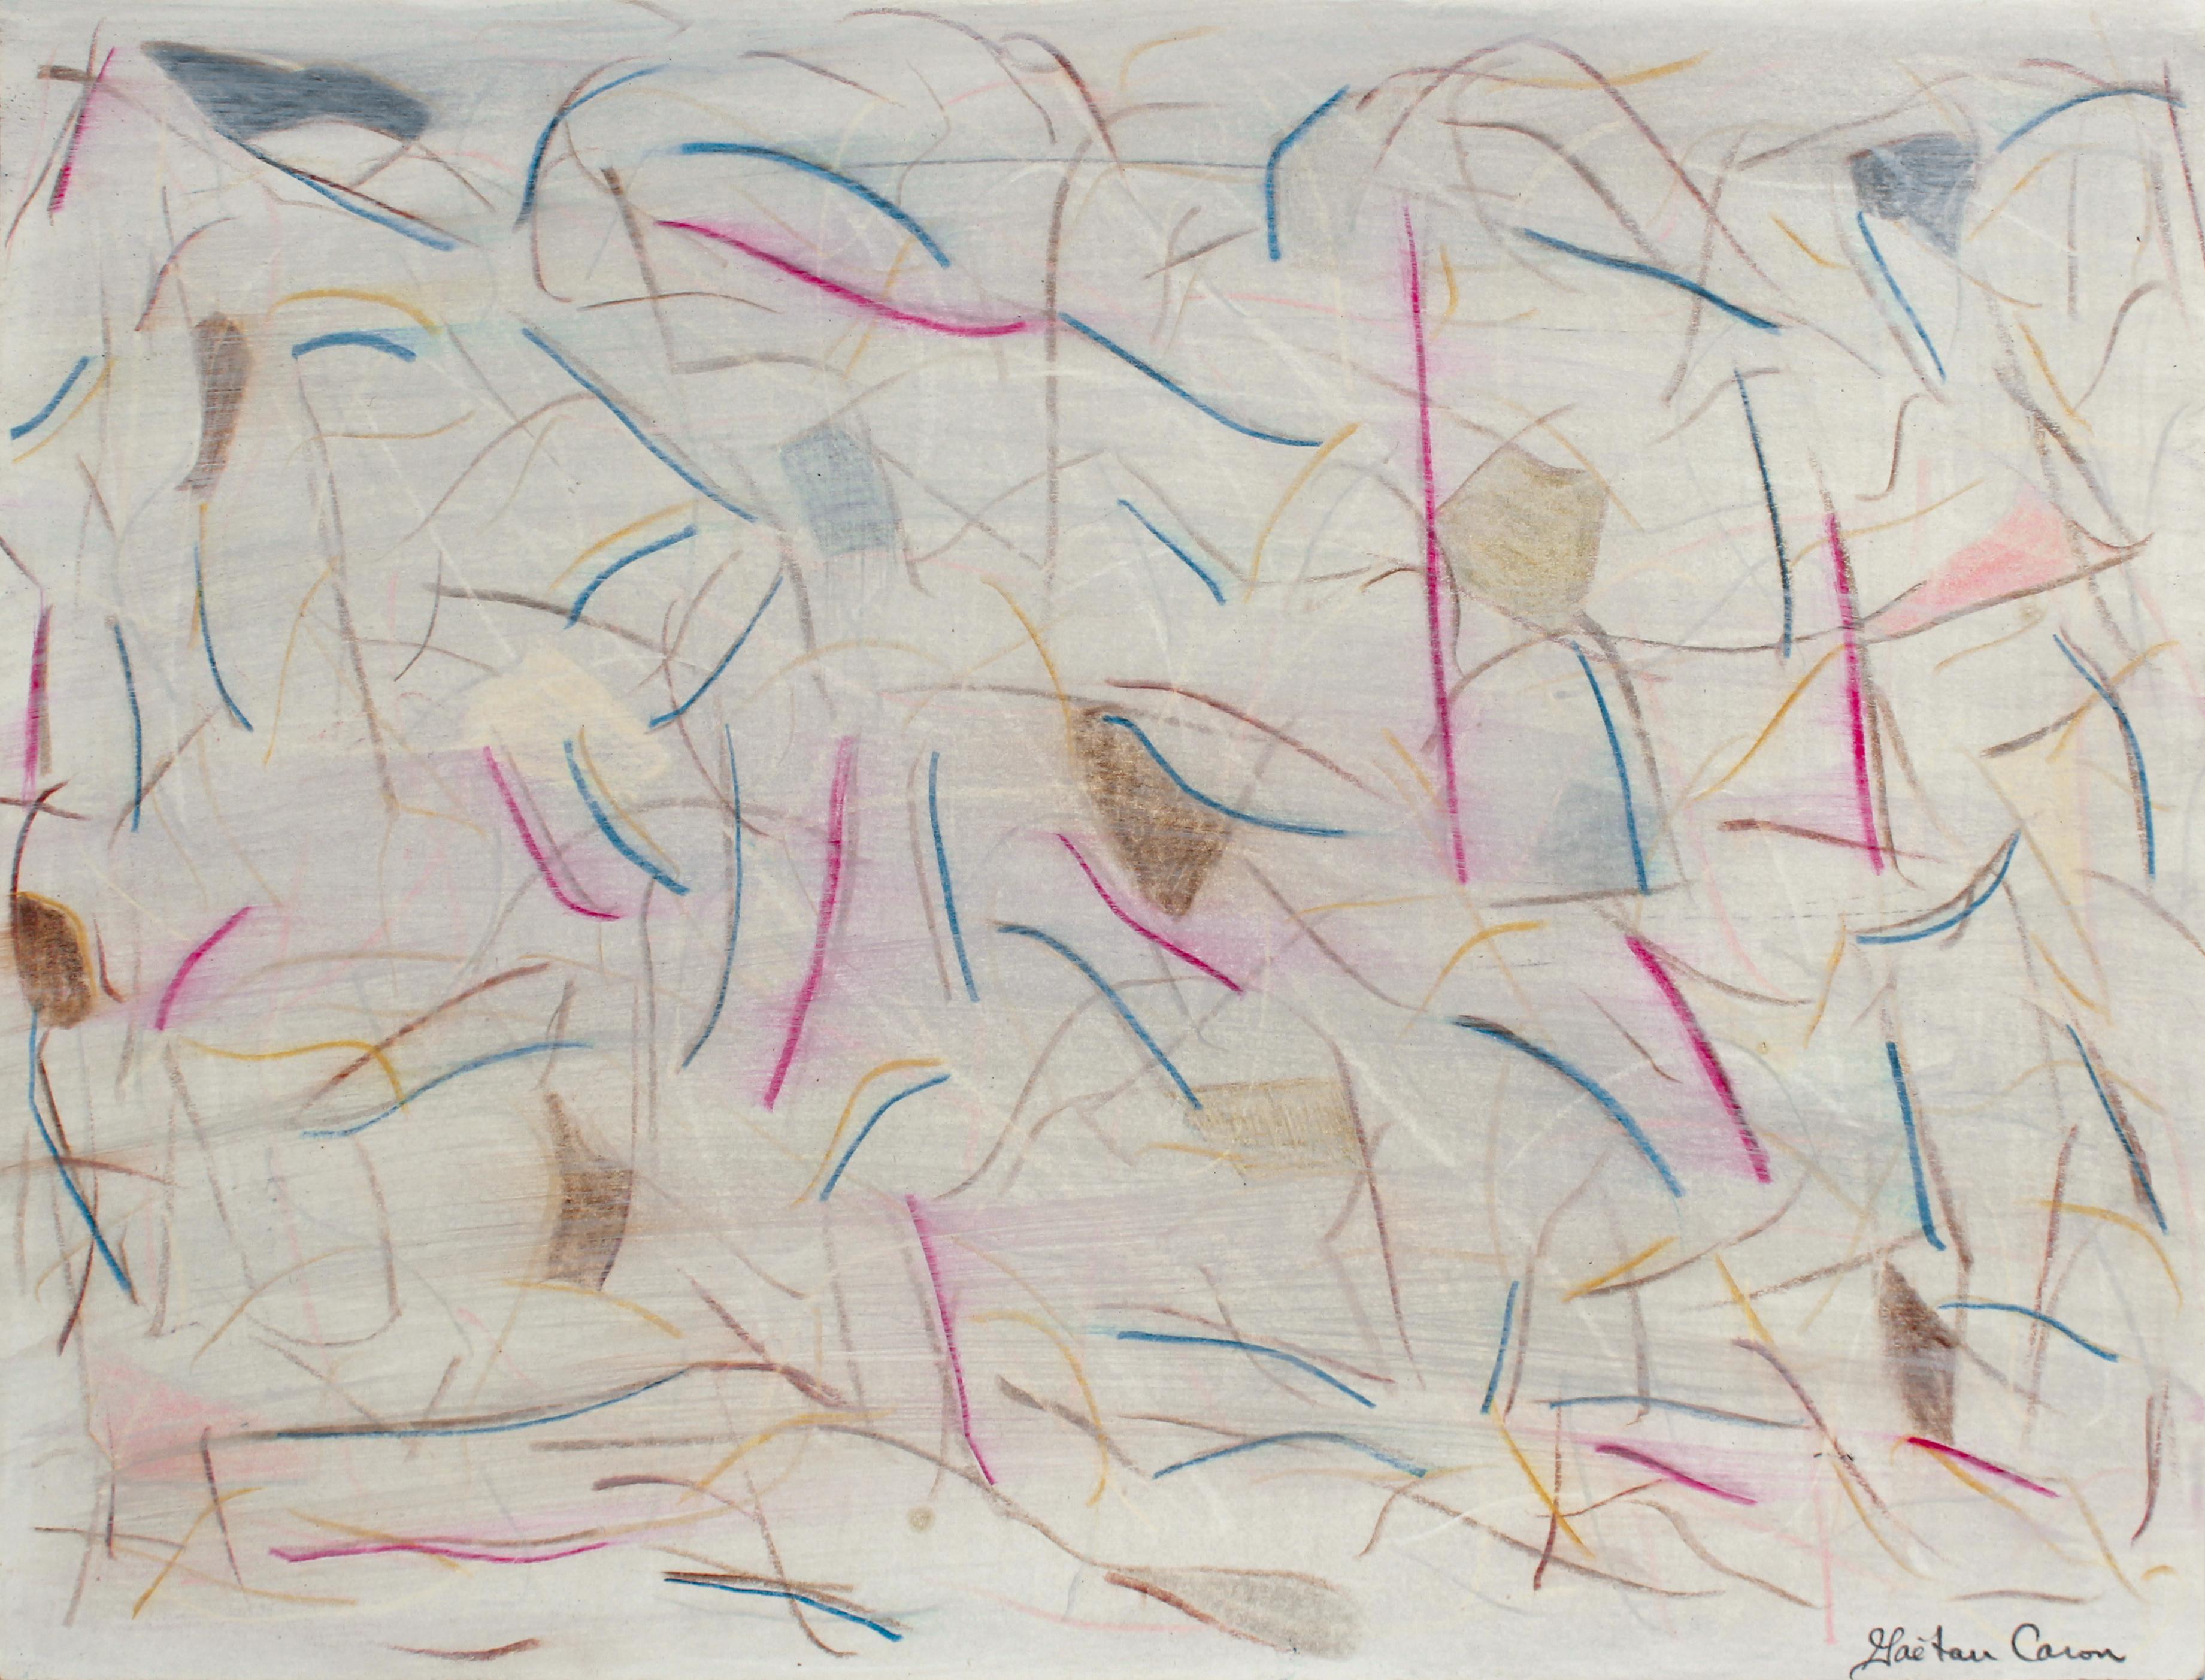 Gaétan Caron Abstract Drawing - "Minimalist Abstraction" 2020 Pencil, Chalk and Oil